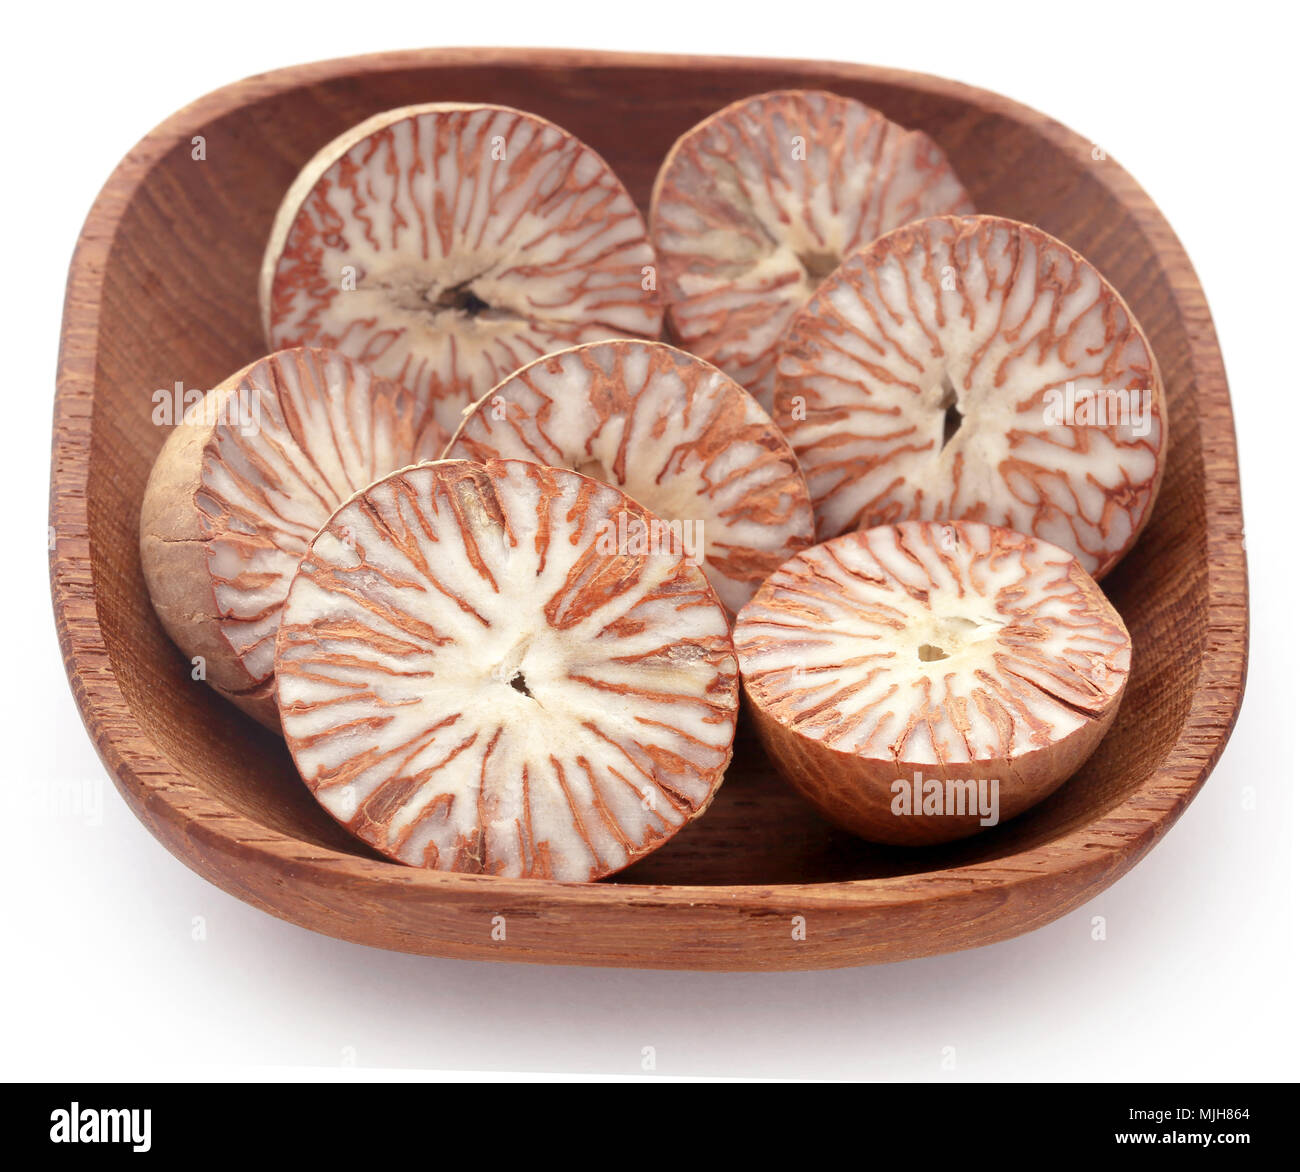 Betel nuts in a bowl over white background Stock Photo